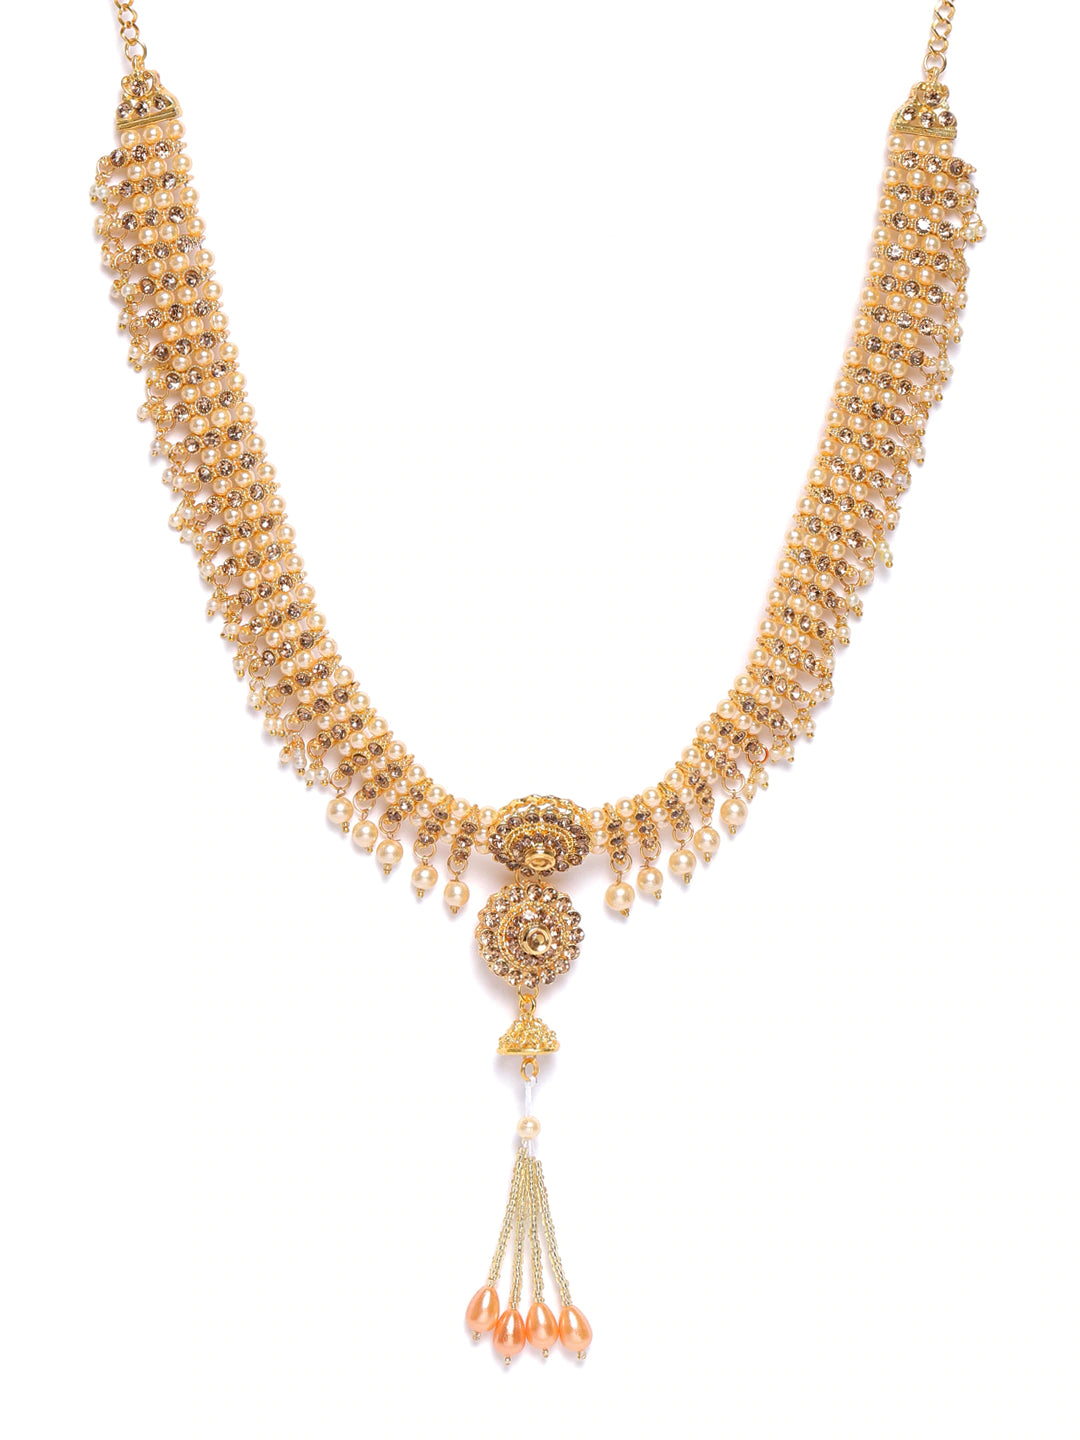 Off-White Gold-Plated CZ-Studded & Beaded Handcrafted Kamarbandh